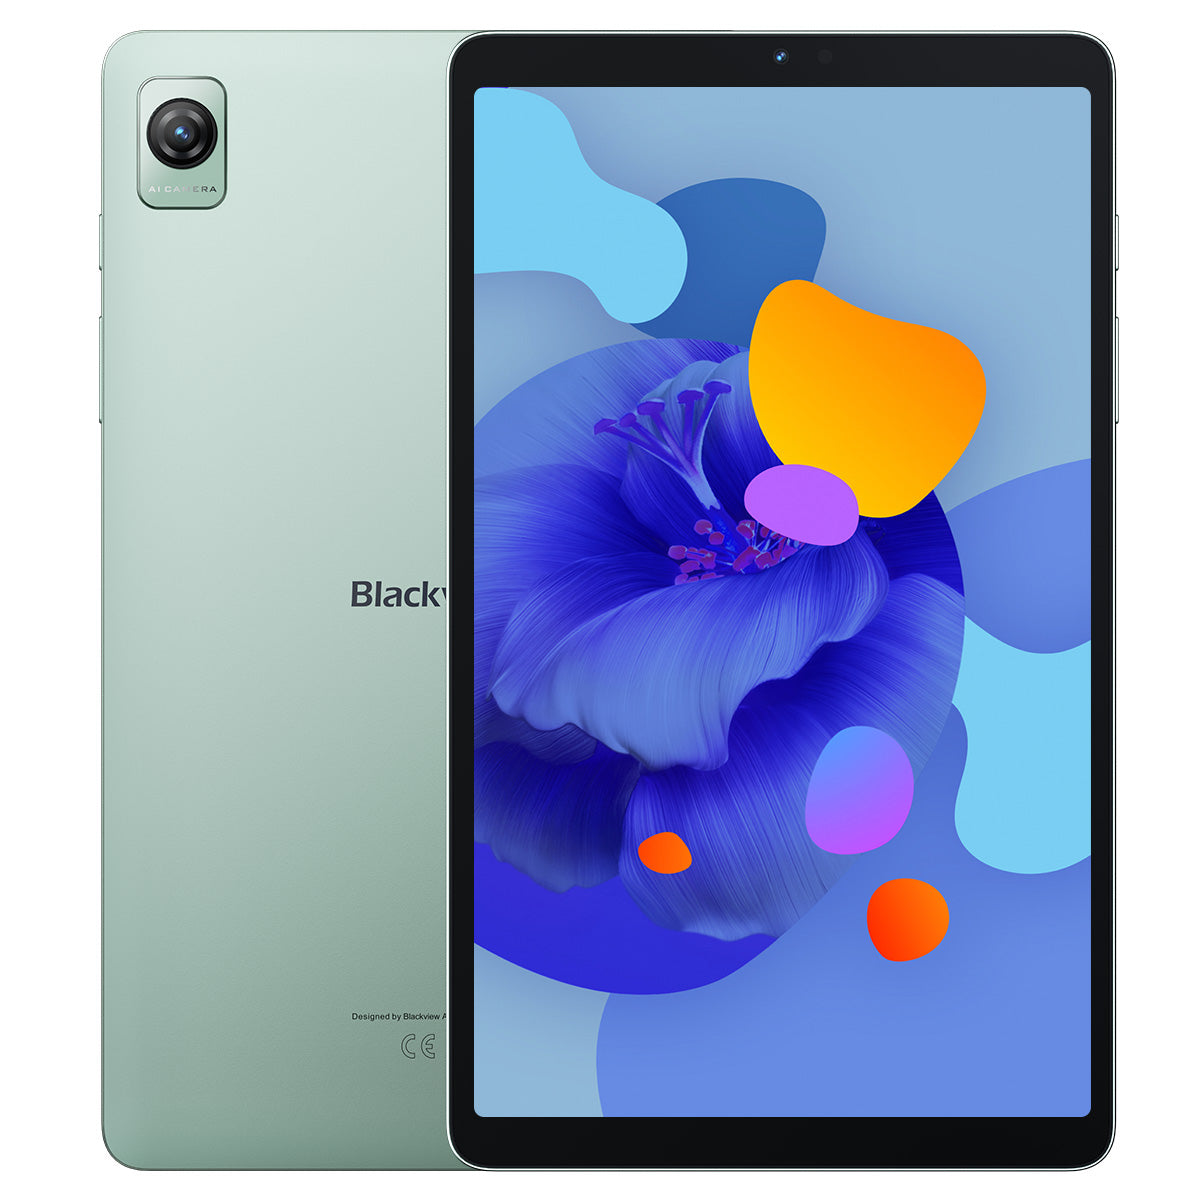 

Blackview Tab 60 8.68-inch Unisoc T606 Octa-core 4GB/6GB+128GB 6050mAh Widevine L1 Support Android Tablet PC 4GB+128GB / Green